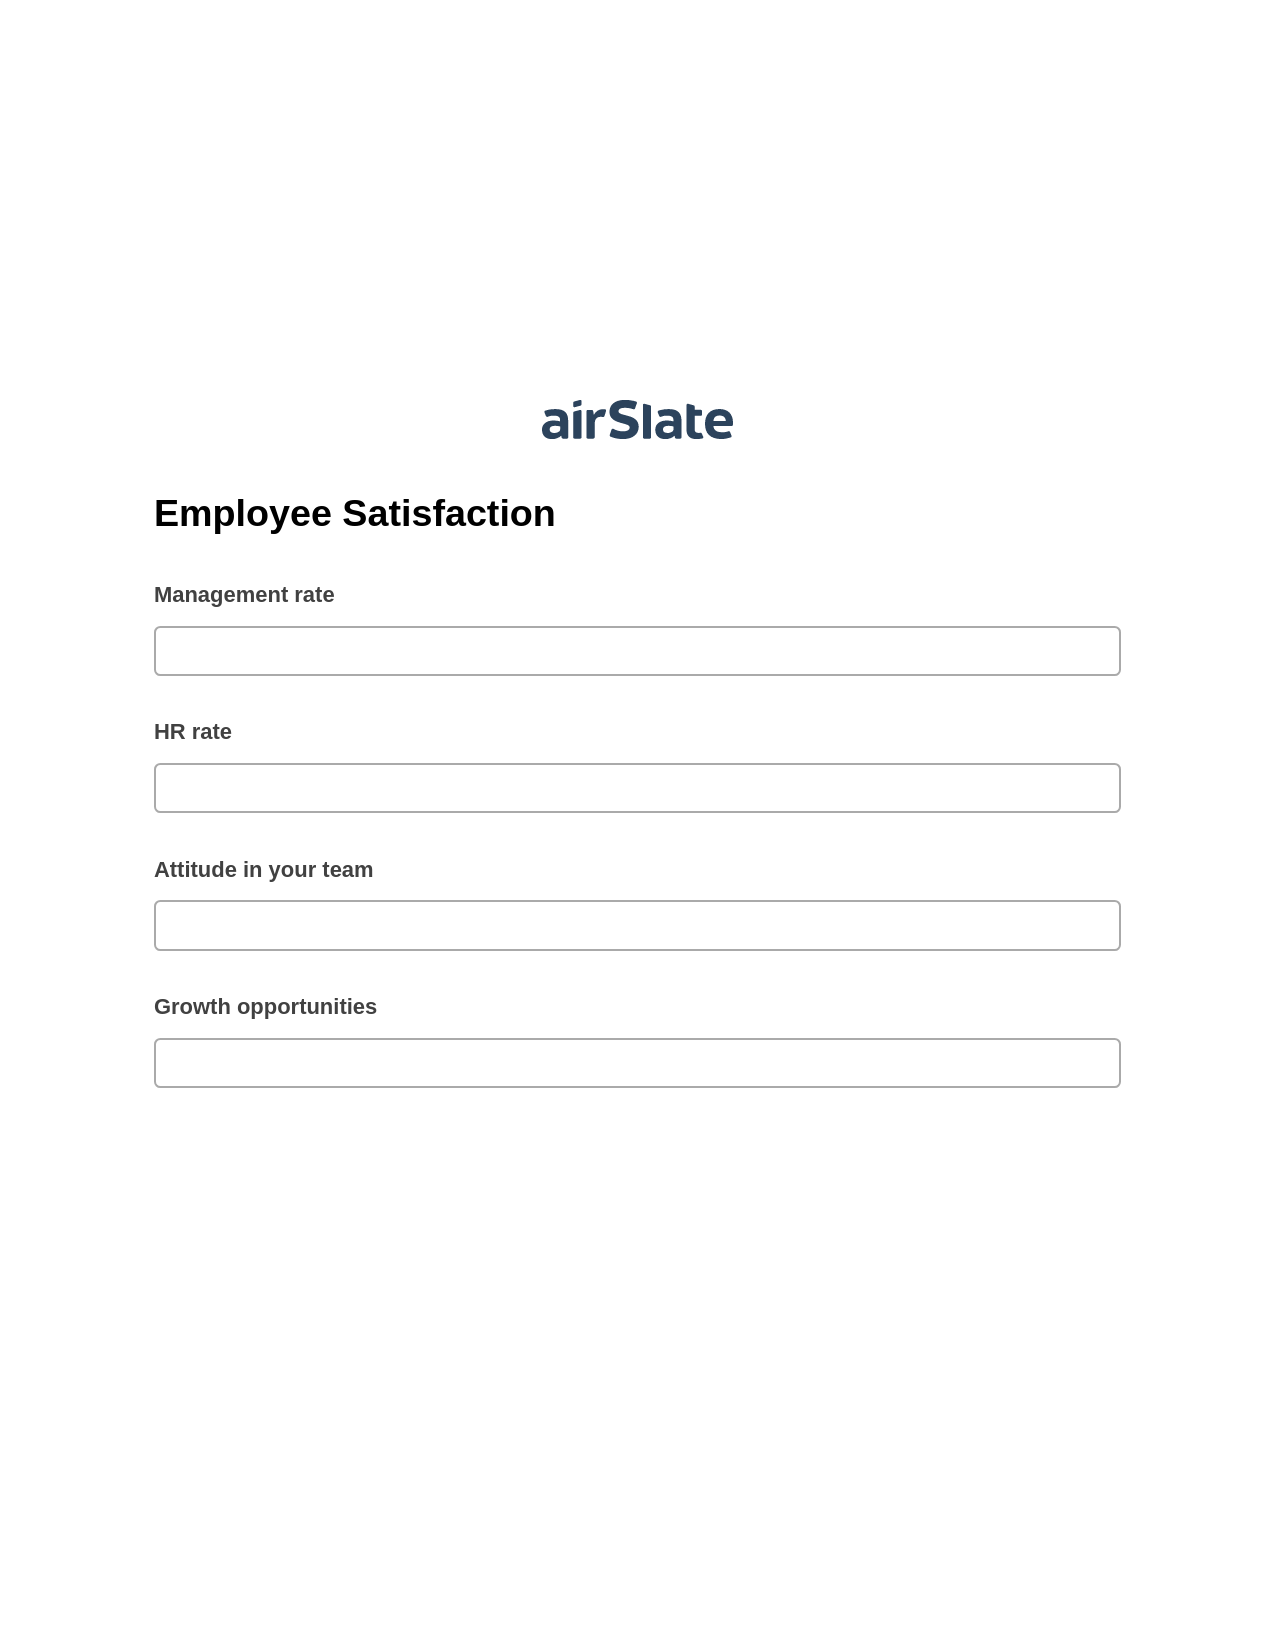 Employee Satisfaction Pre-fill Document Bot, Email Notification Bot, Export to Excel 365 Bot